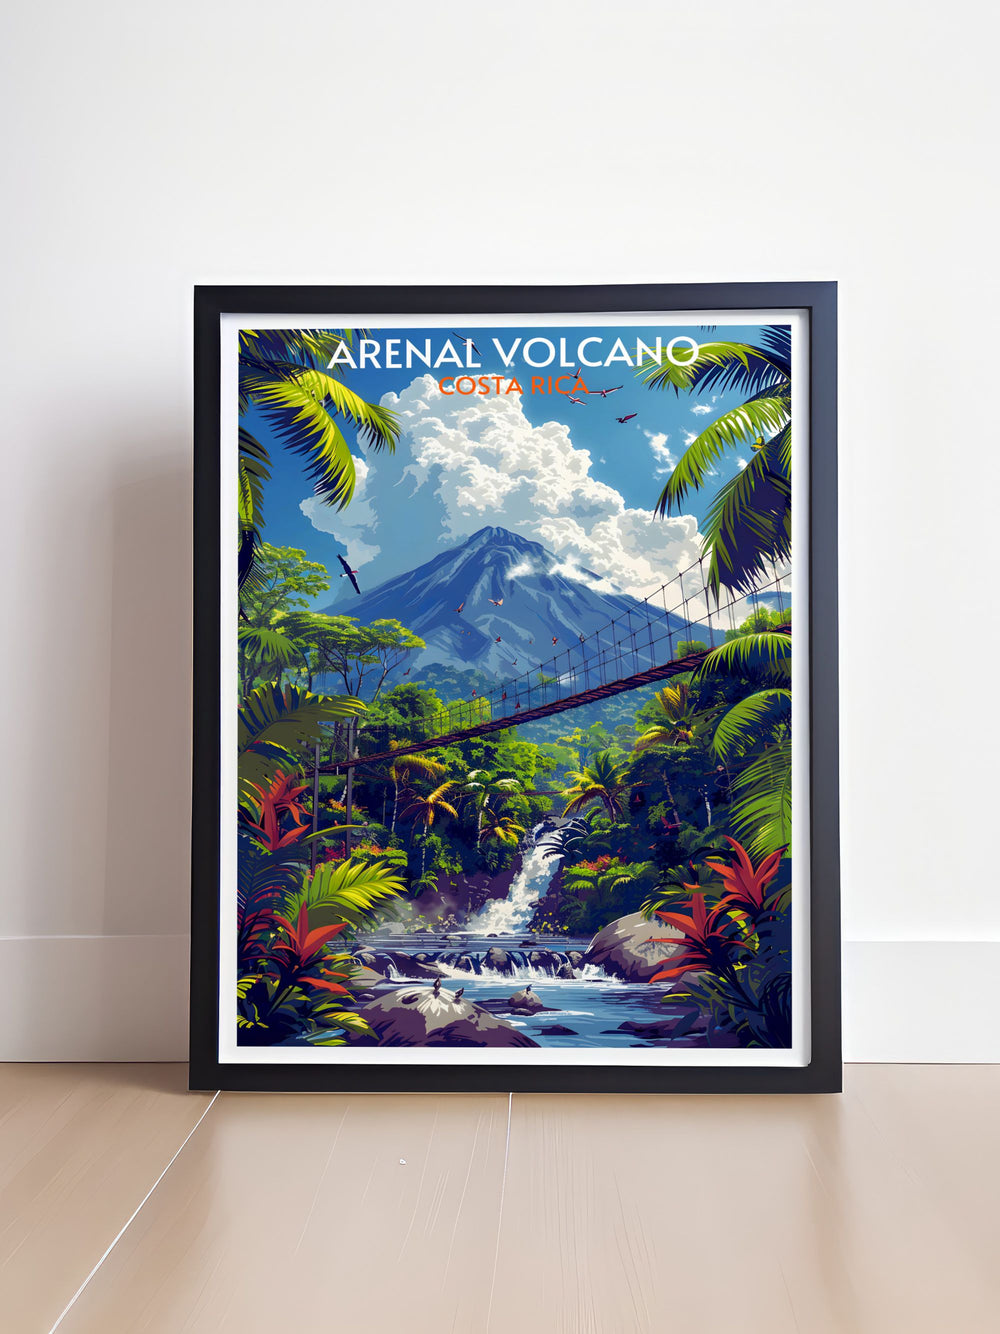 The Arenal Hanging Bridges portrayed in wall art, with detailed imagery of the surrounding dense rainforest and vibrant wildlife.